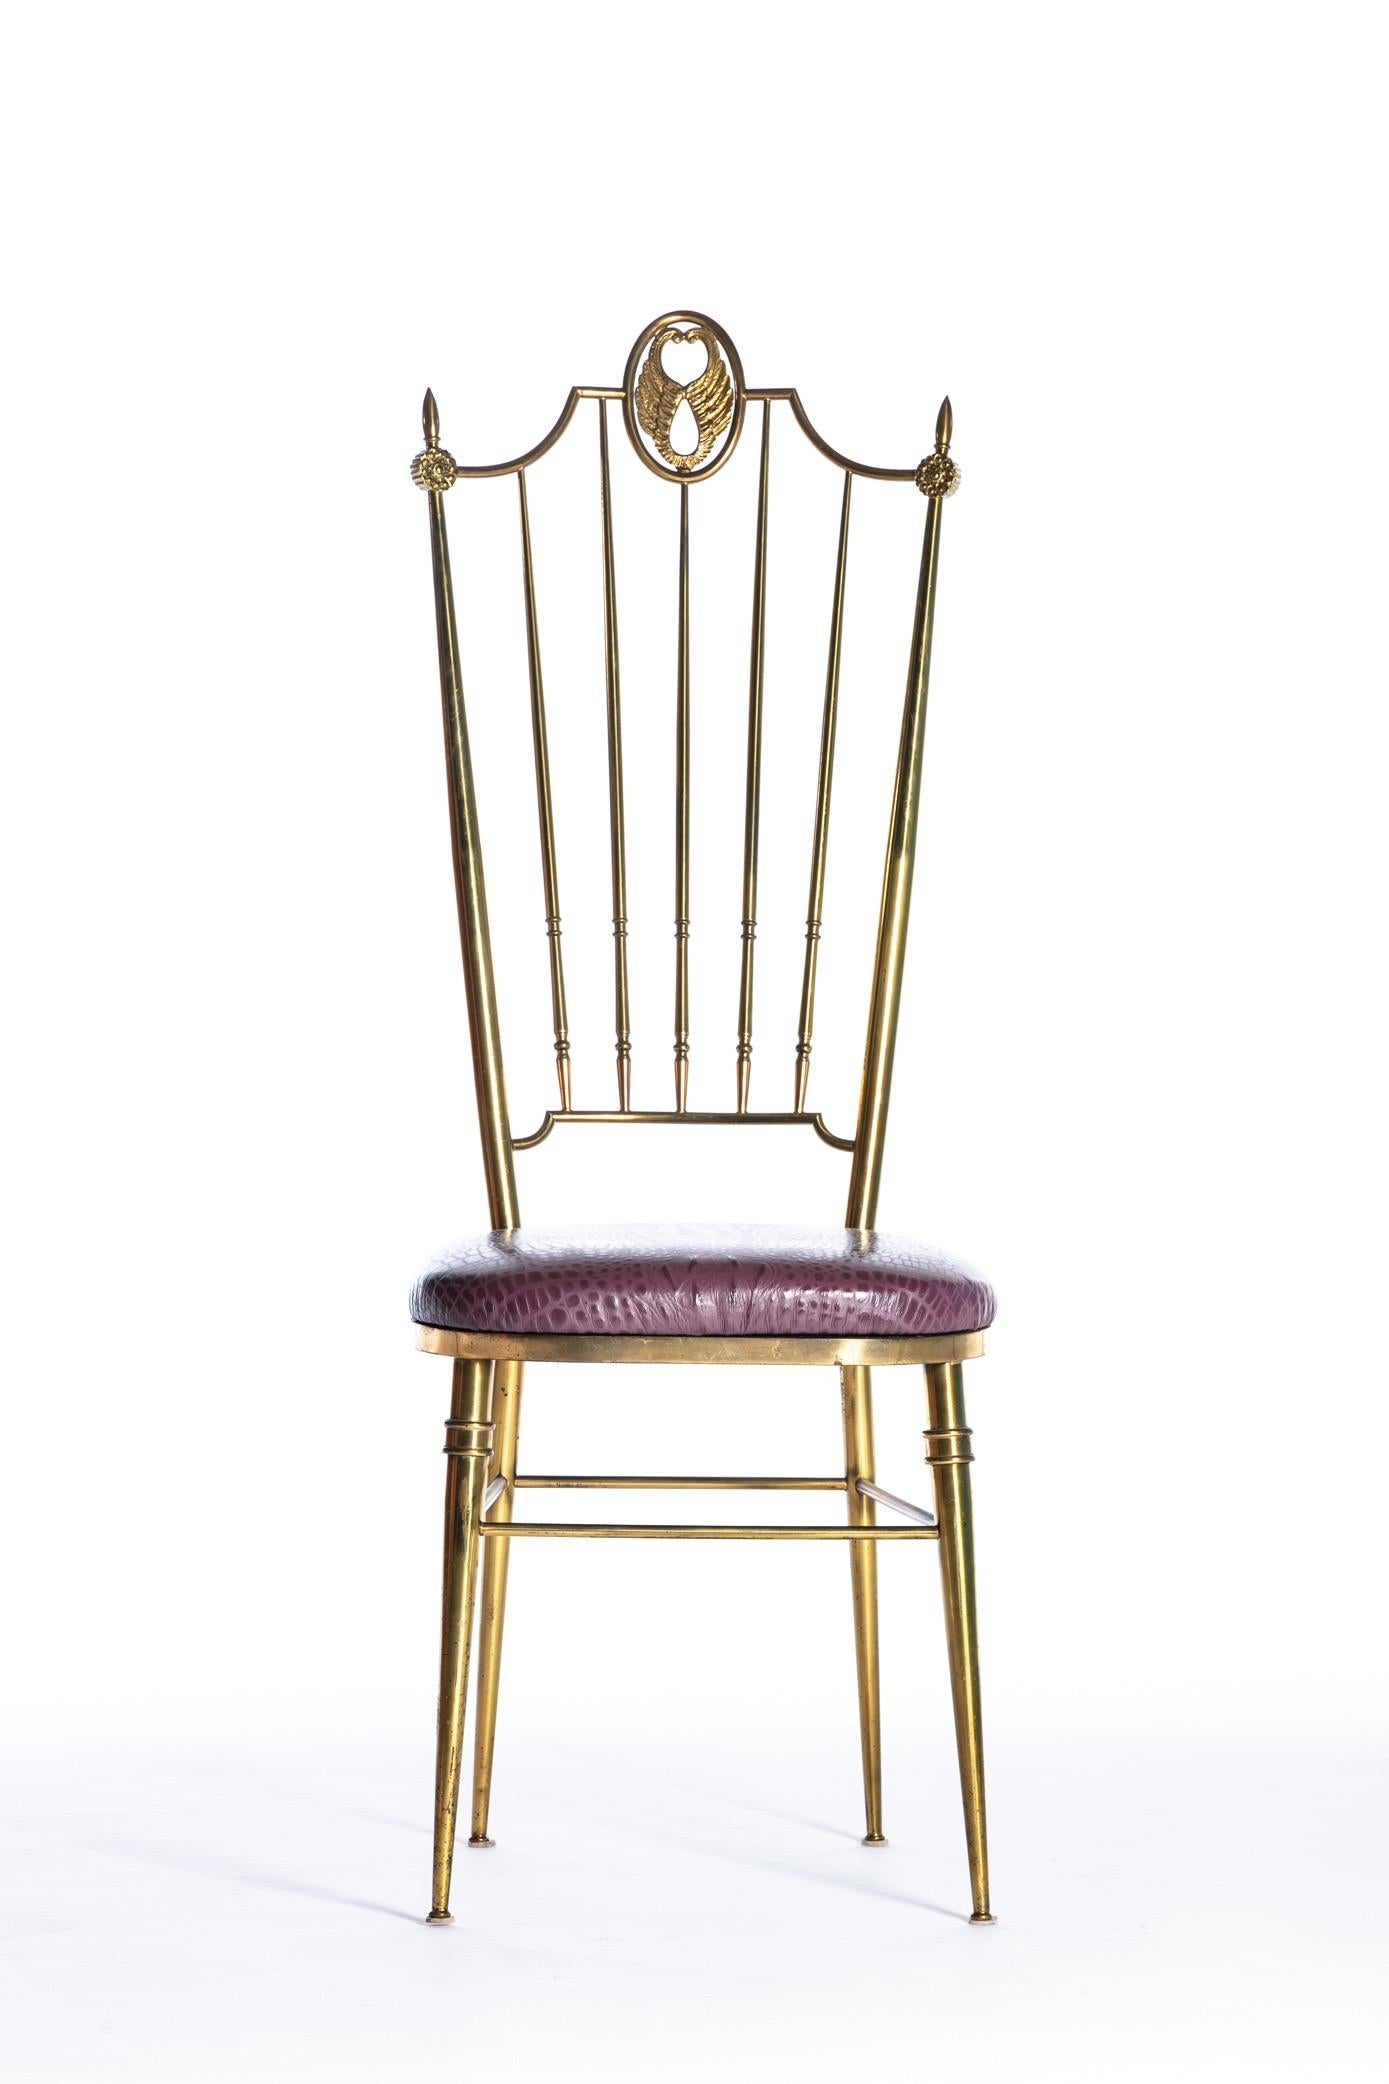 Pair of high back brass Italian Chiavari chairs with aubergine crocodile embossed leather seats, circa 1960. Want to see more beautiful things? Scroll down below and click 